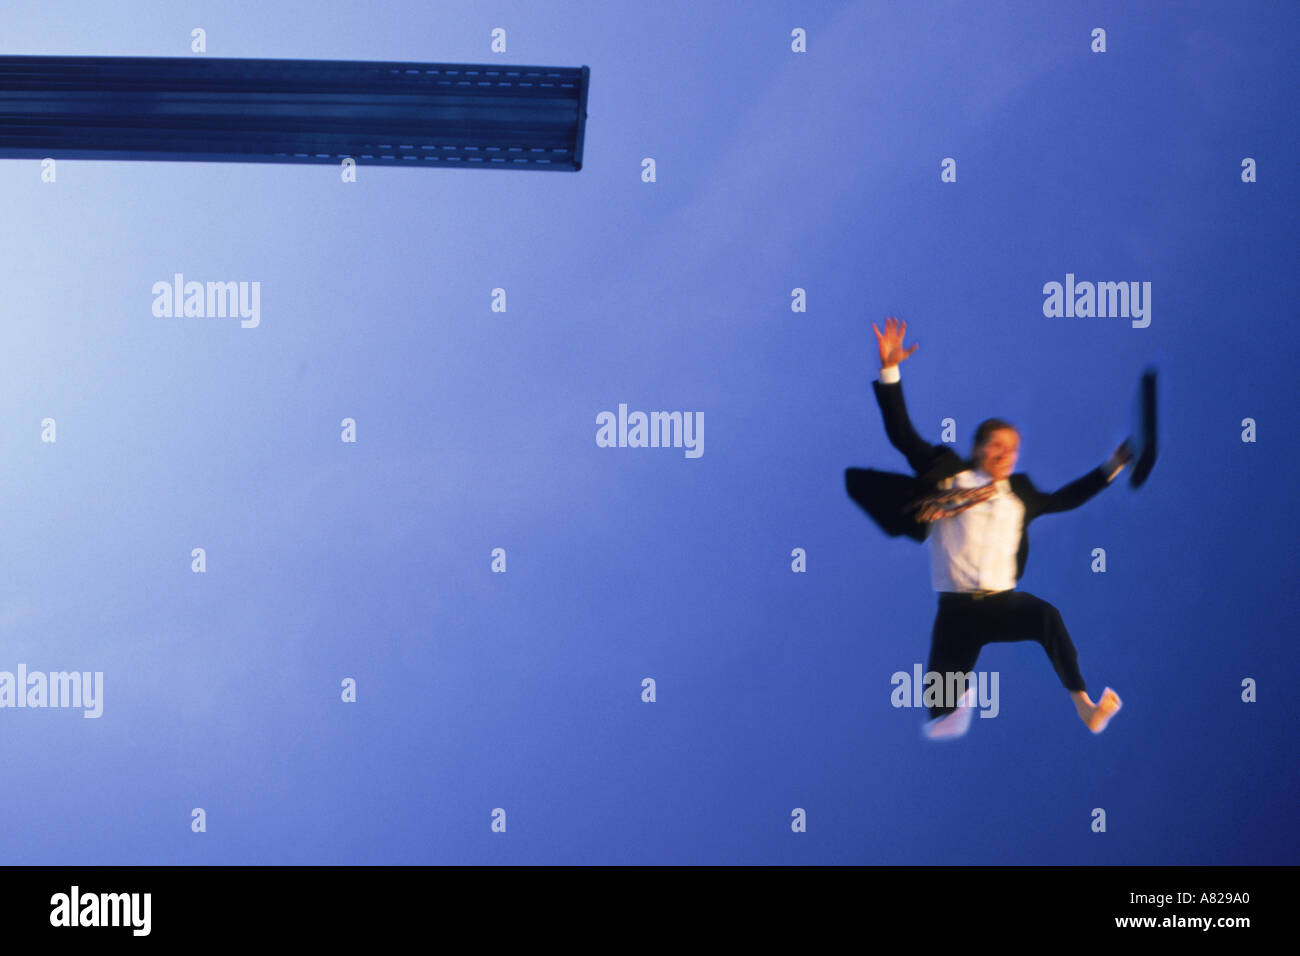 Crazy businessman jumping off diving board in desperation and frustration Stock Photo